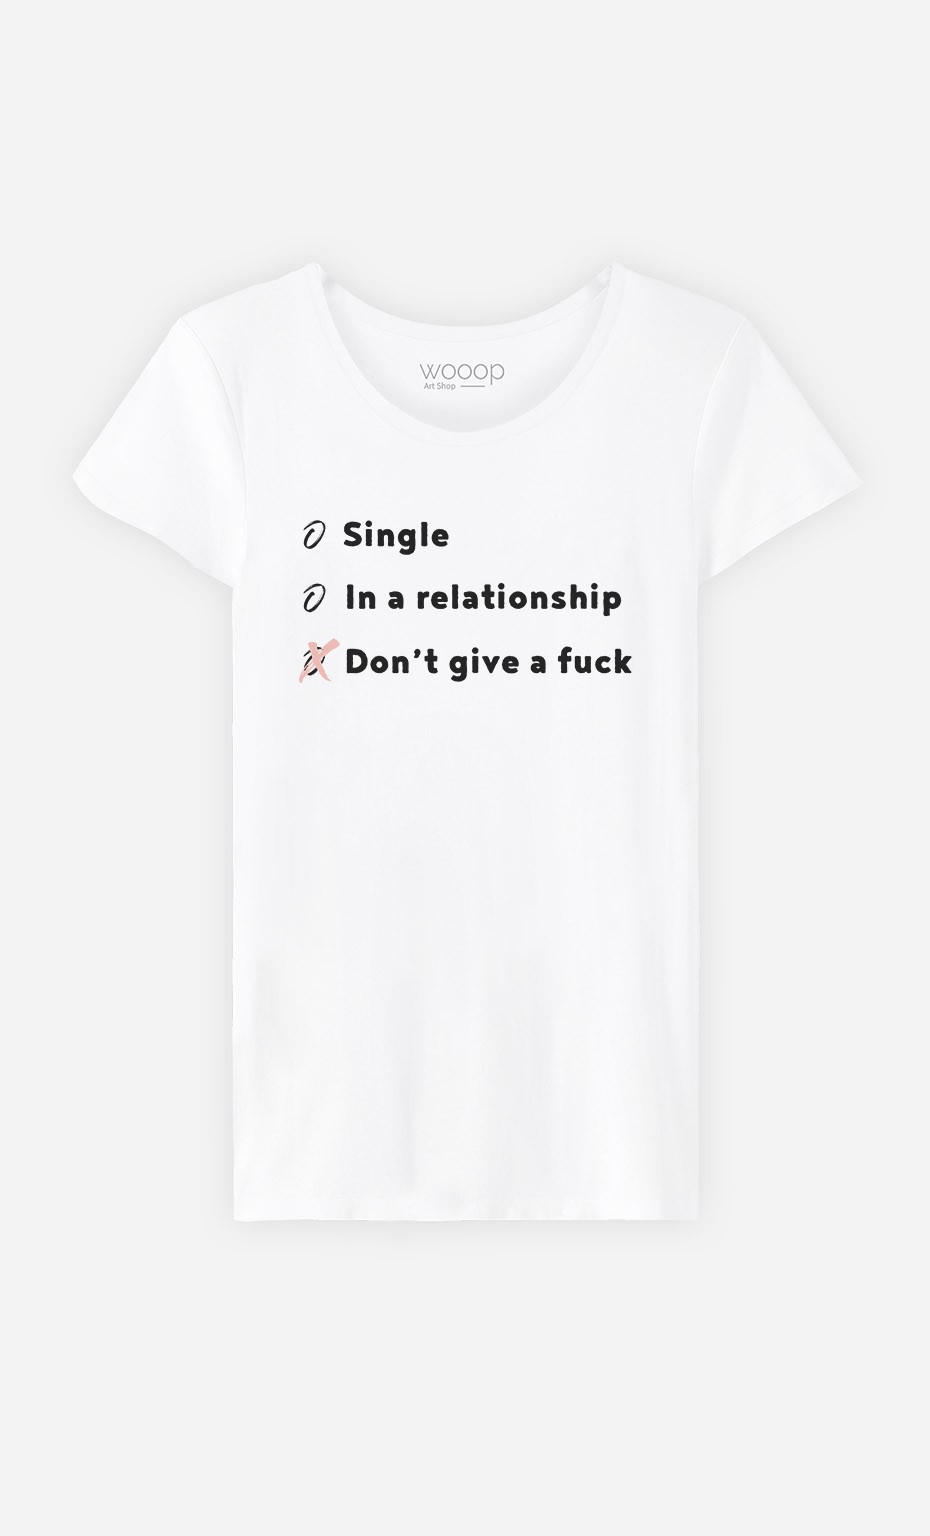 T-Shirt Single, In a Relationship, Don't Give a Fuck